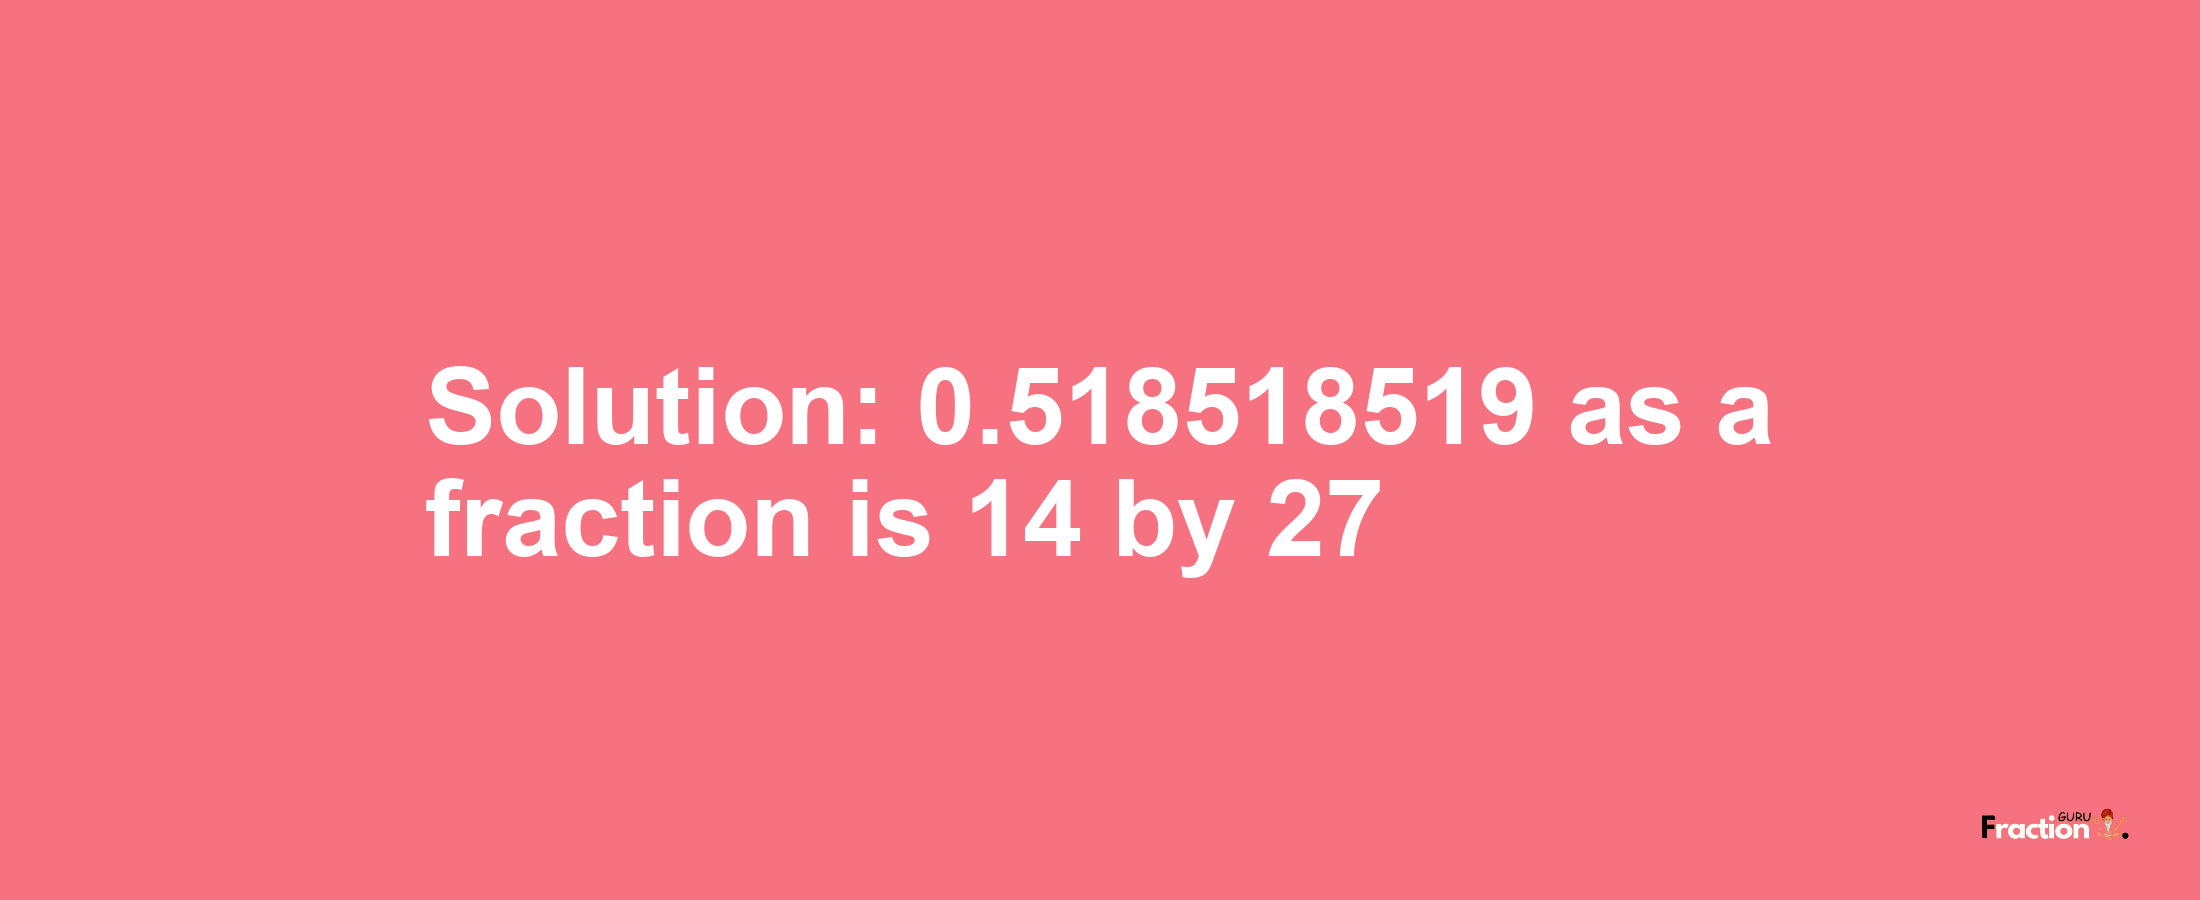 Solution:0.518518519 as a fraction is 14/27